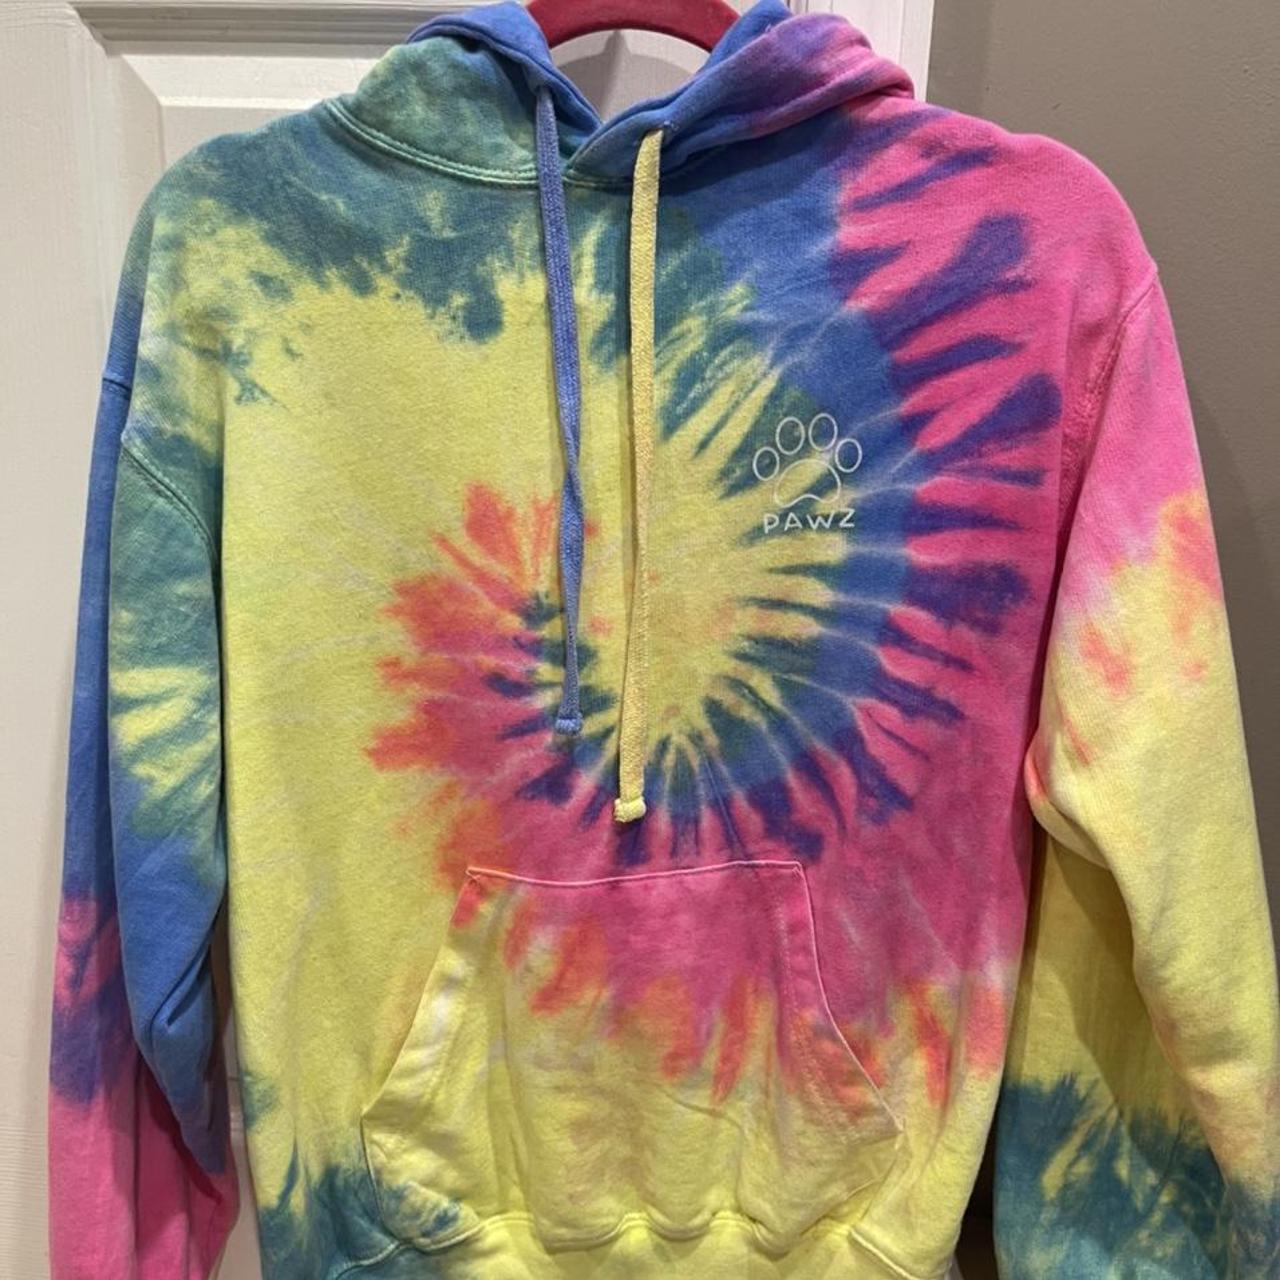 Product Image 1 - PAWZ multi colored hoodie
Super comfy